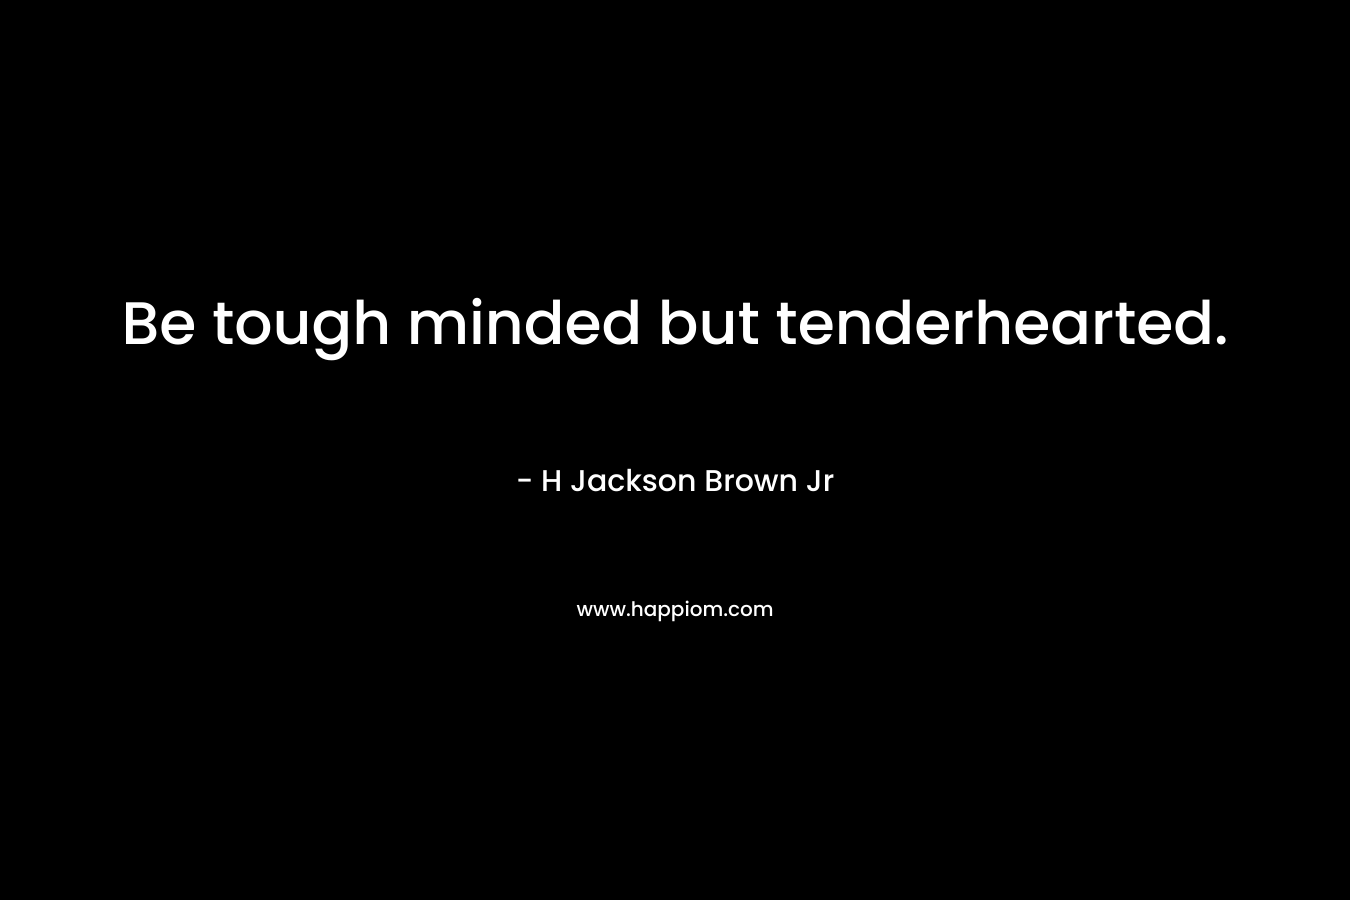 Be tough minded but tenderhearted. – H Jackson Brown Jr